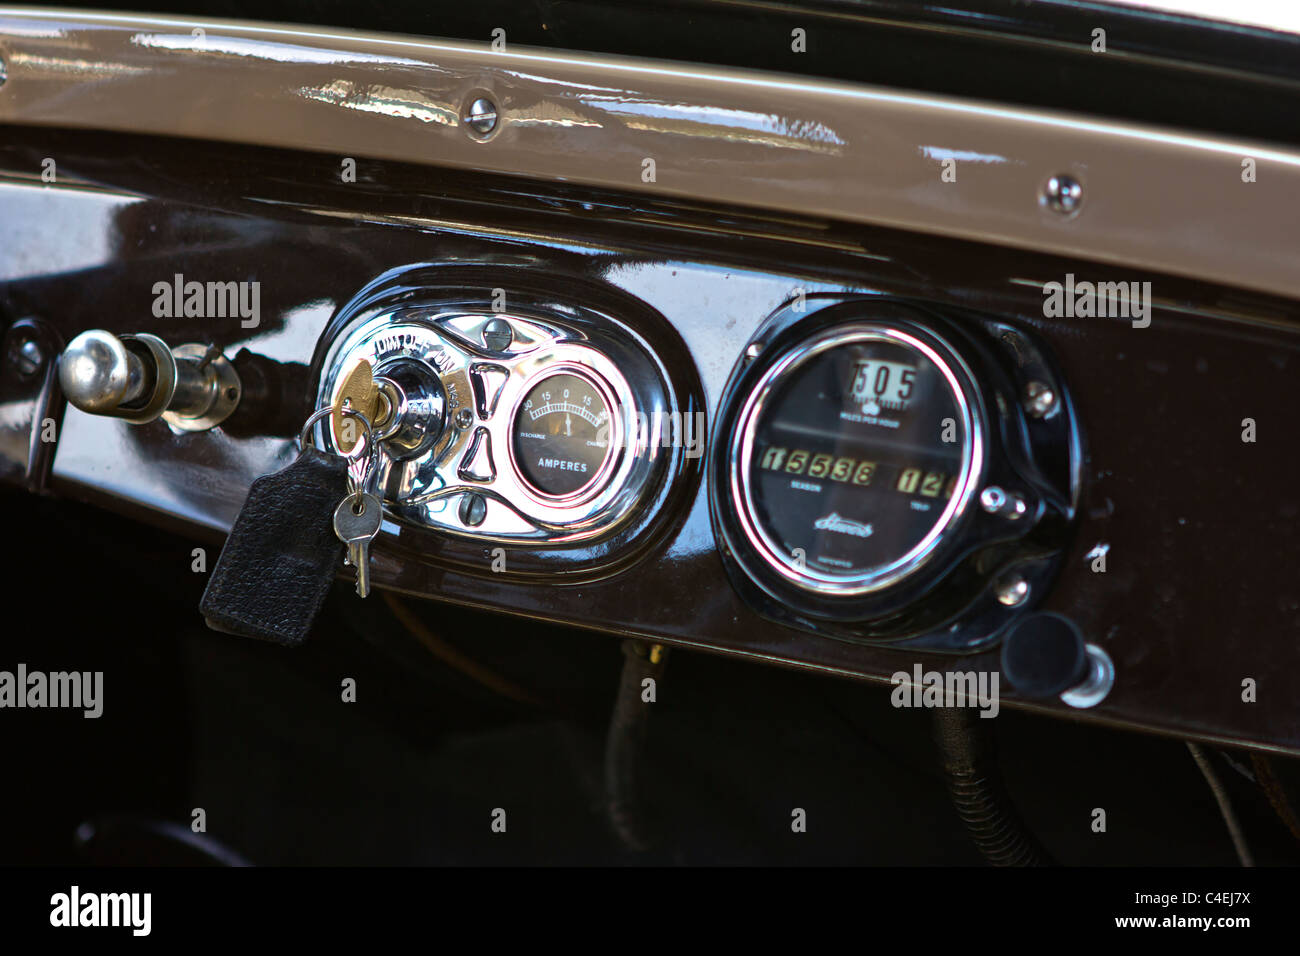 Estes Park, Colorado - The dashboard of a Model A Ford automobile produced between 1927 and 1931. Point of focus is on the keys. Stock Photo